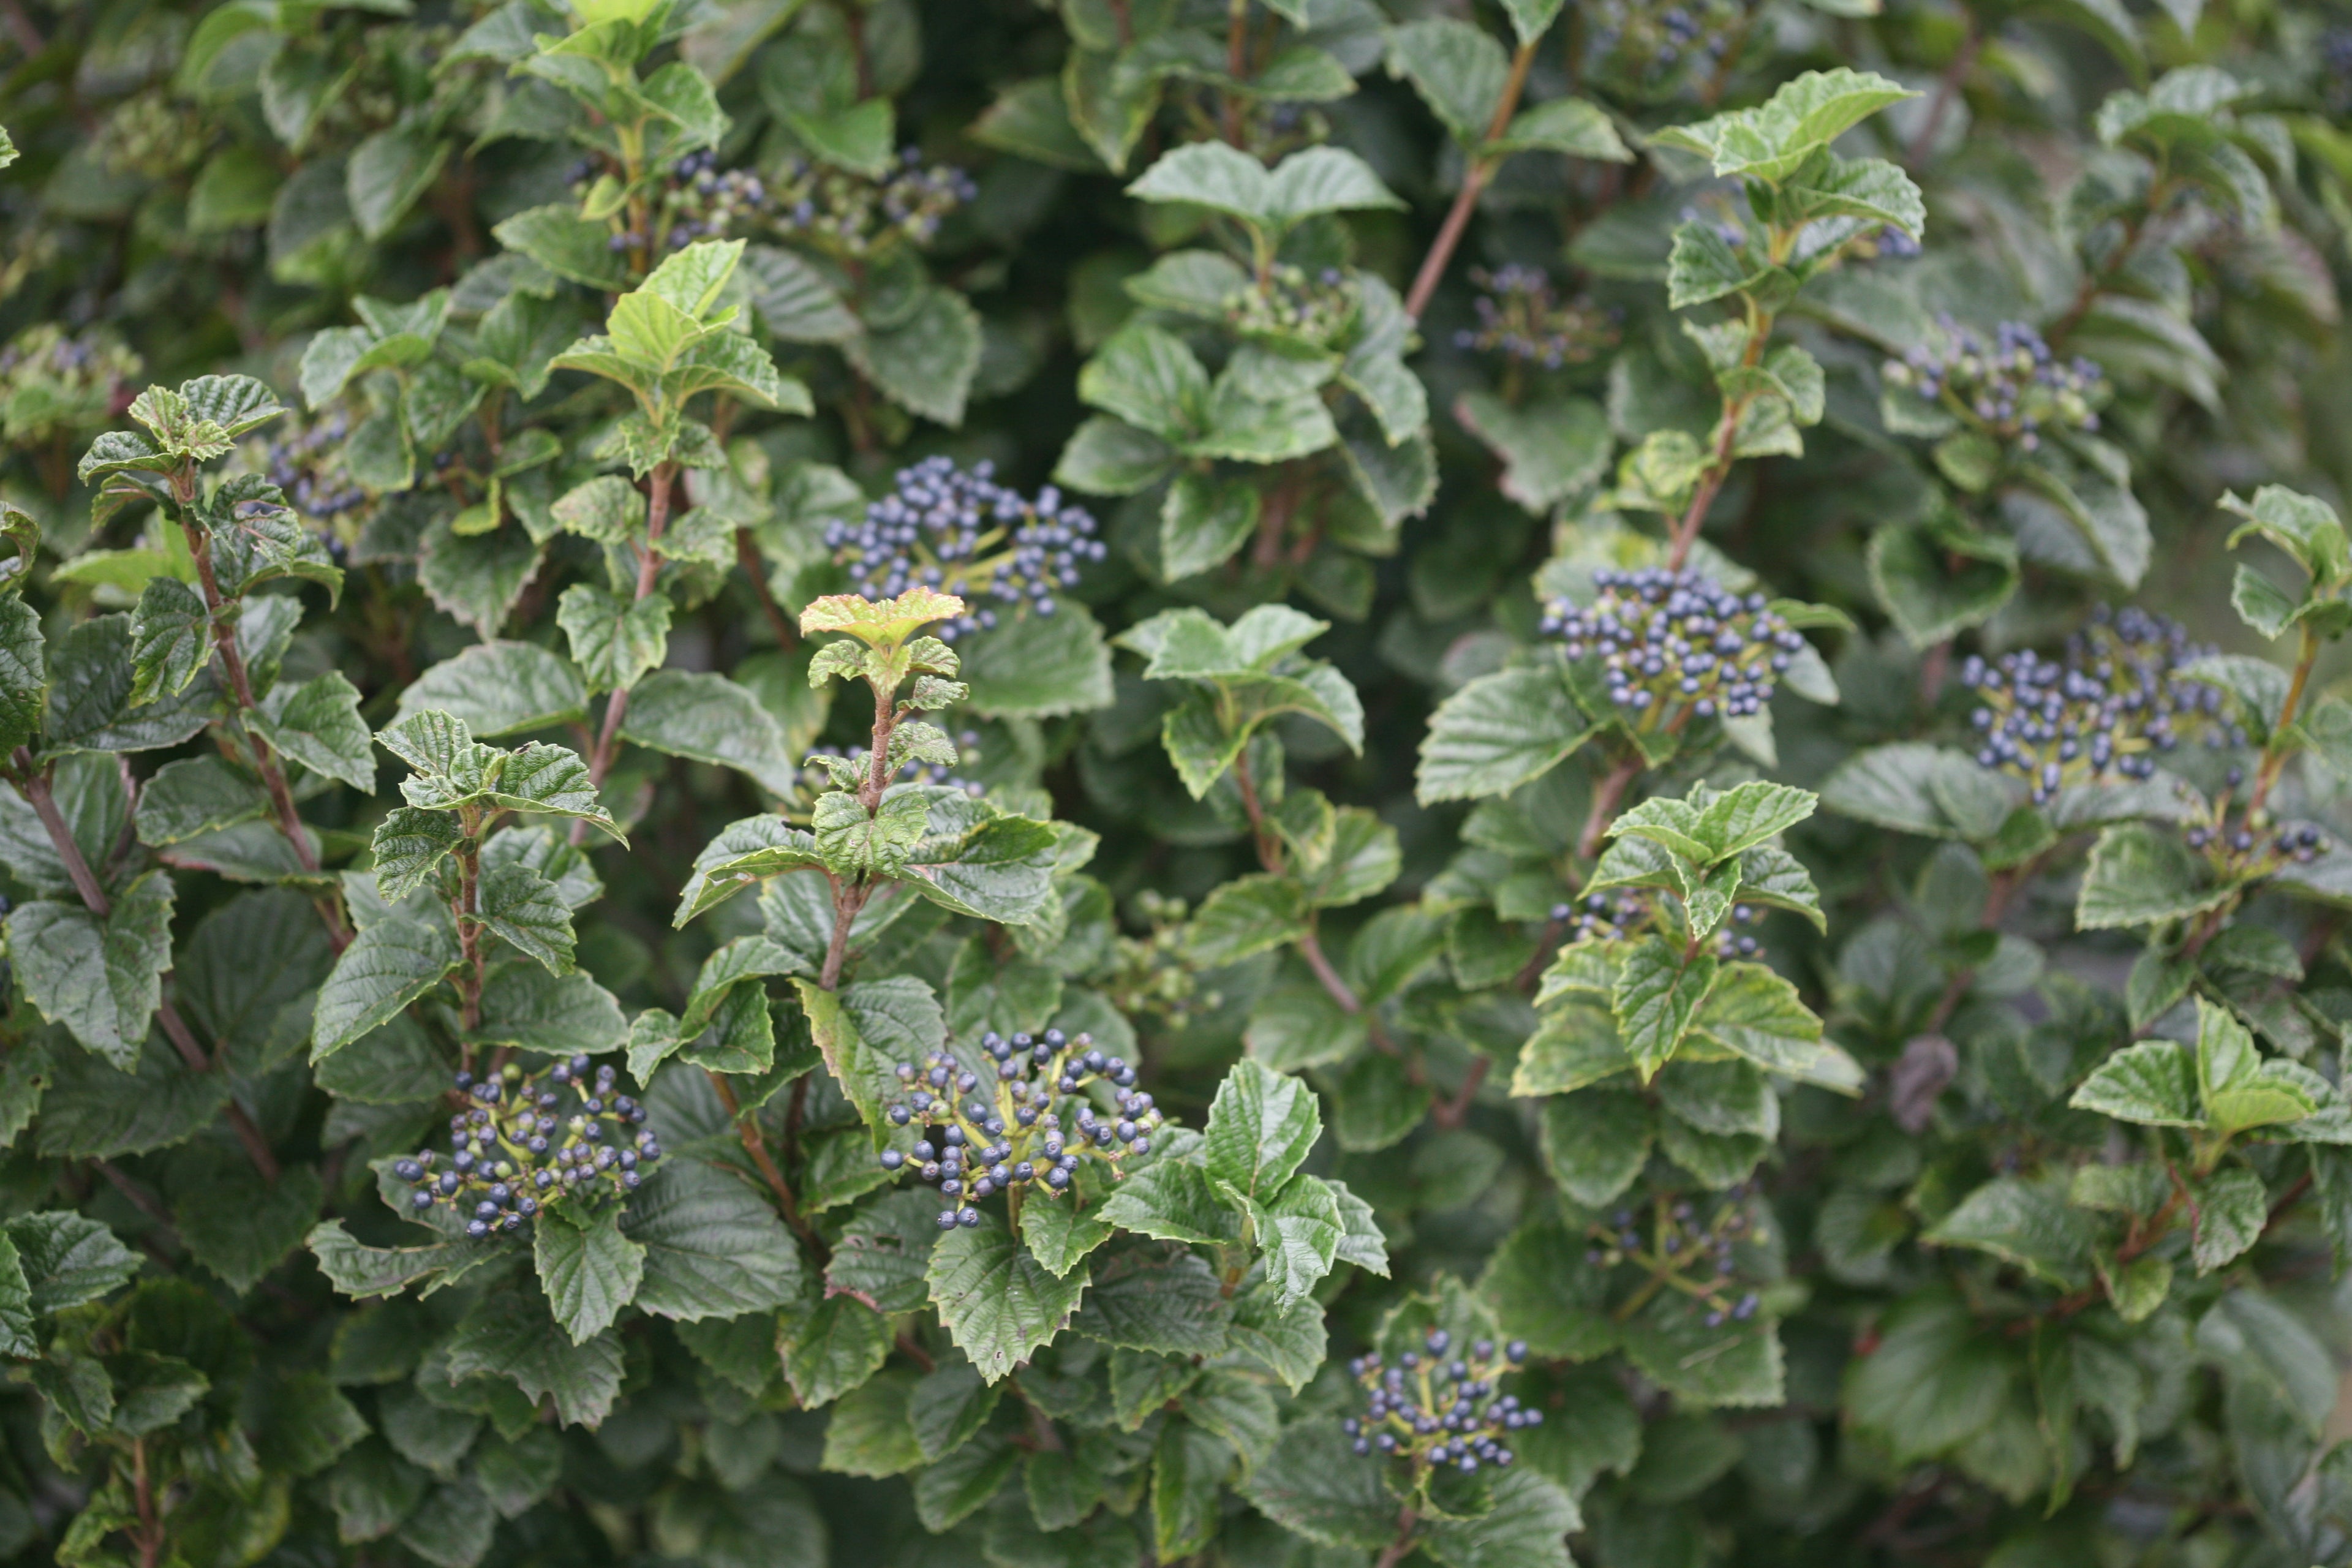 All That Glitters viburnum, a large shrub with glossy foliage and blue berries.